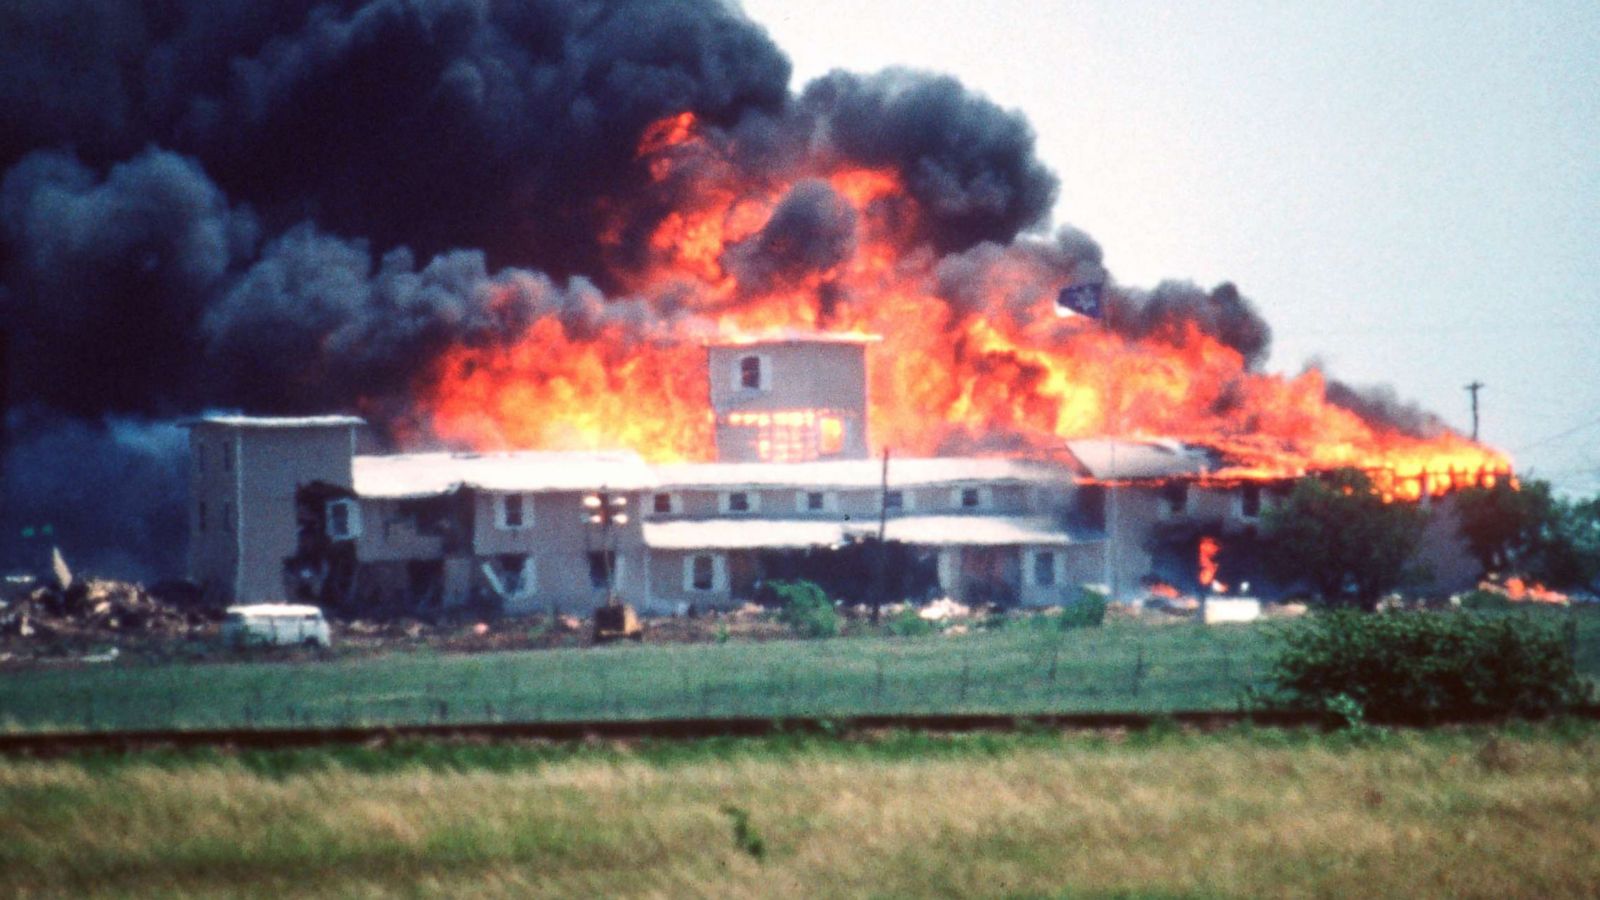 164. the attack and mass murder of 82 people in Waco, TX by the US federal ...